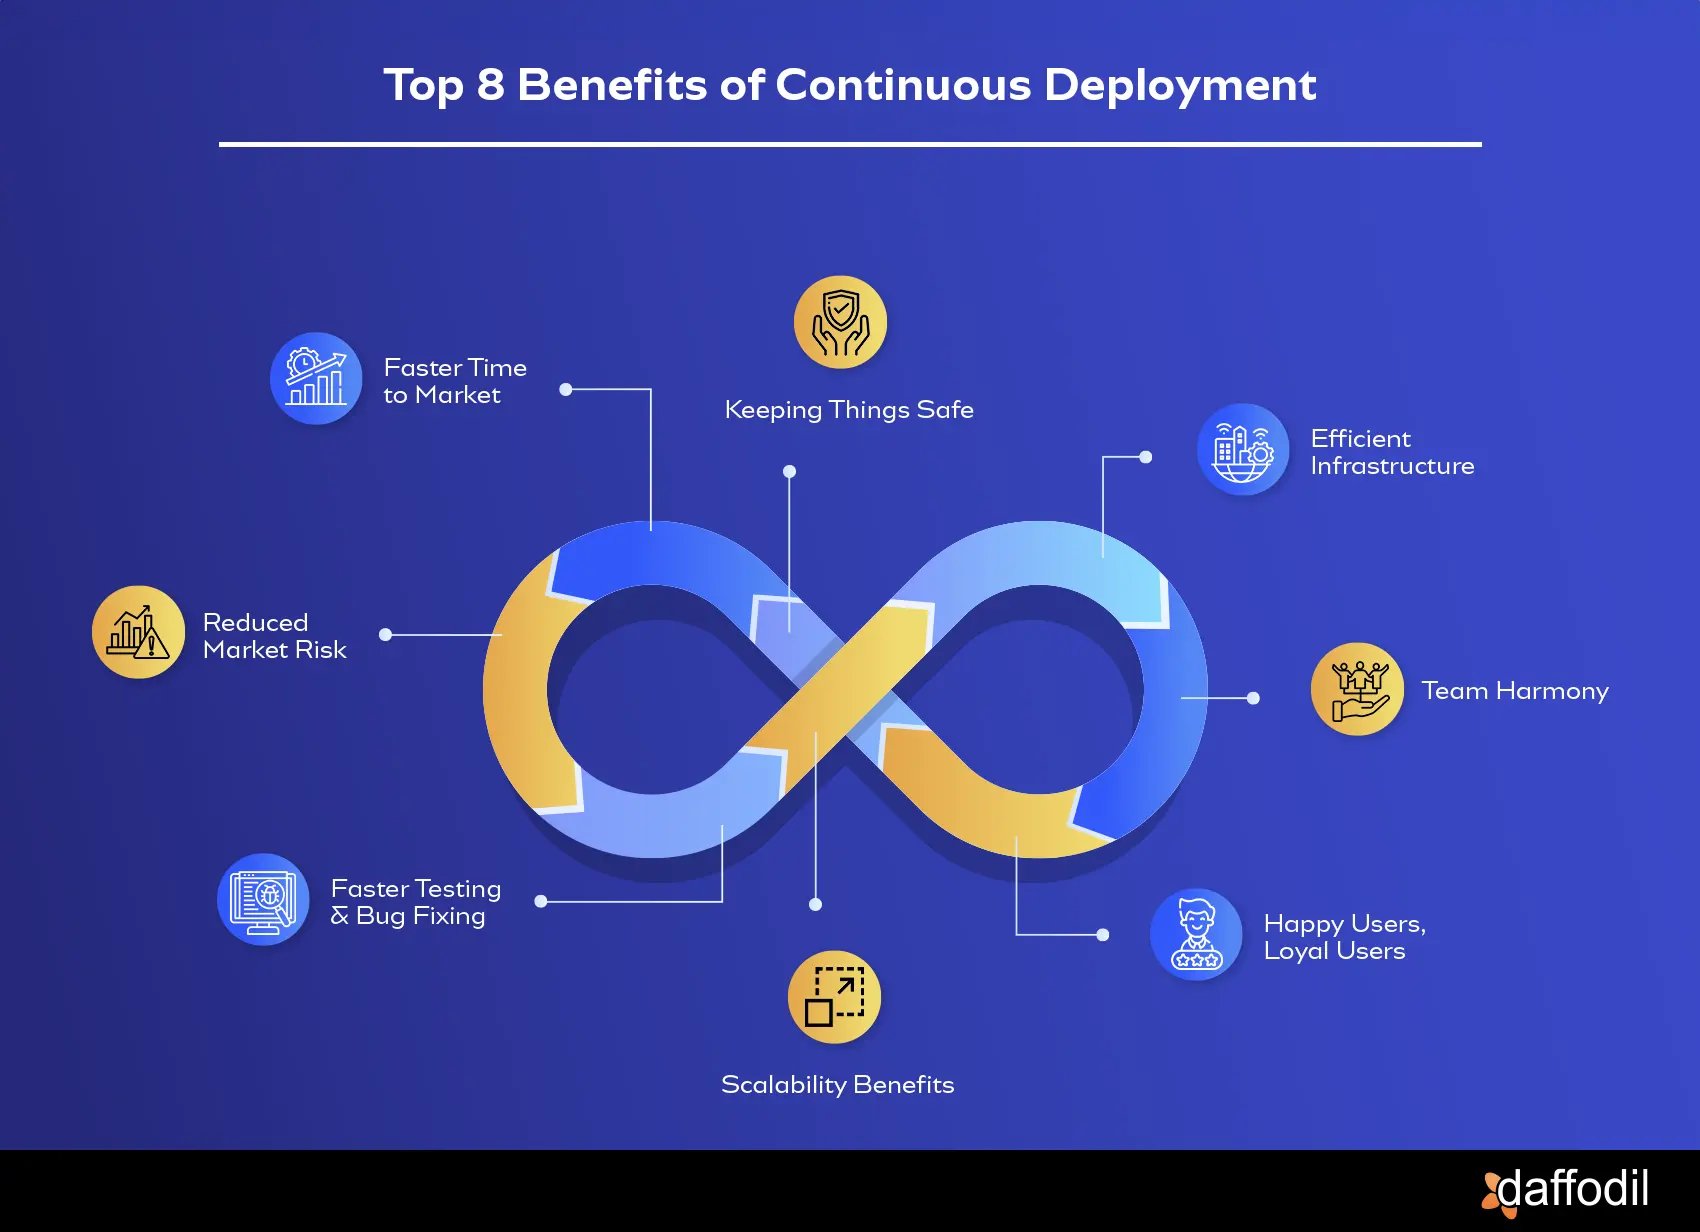 Top 8 Benefits of Continuous Deployment